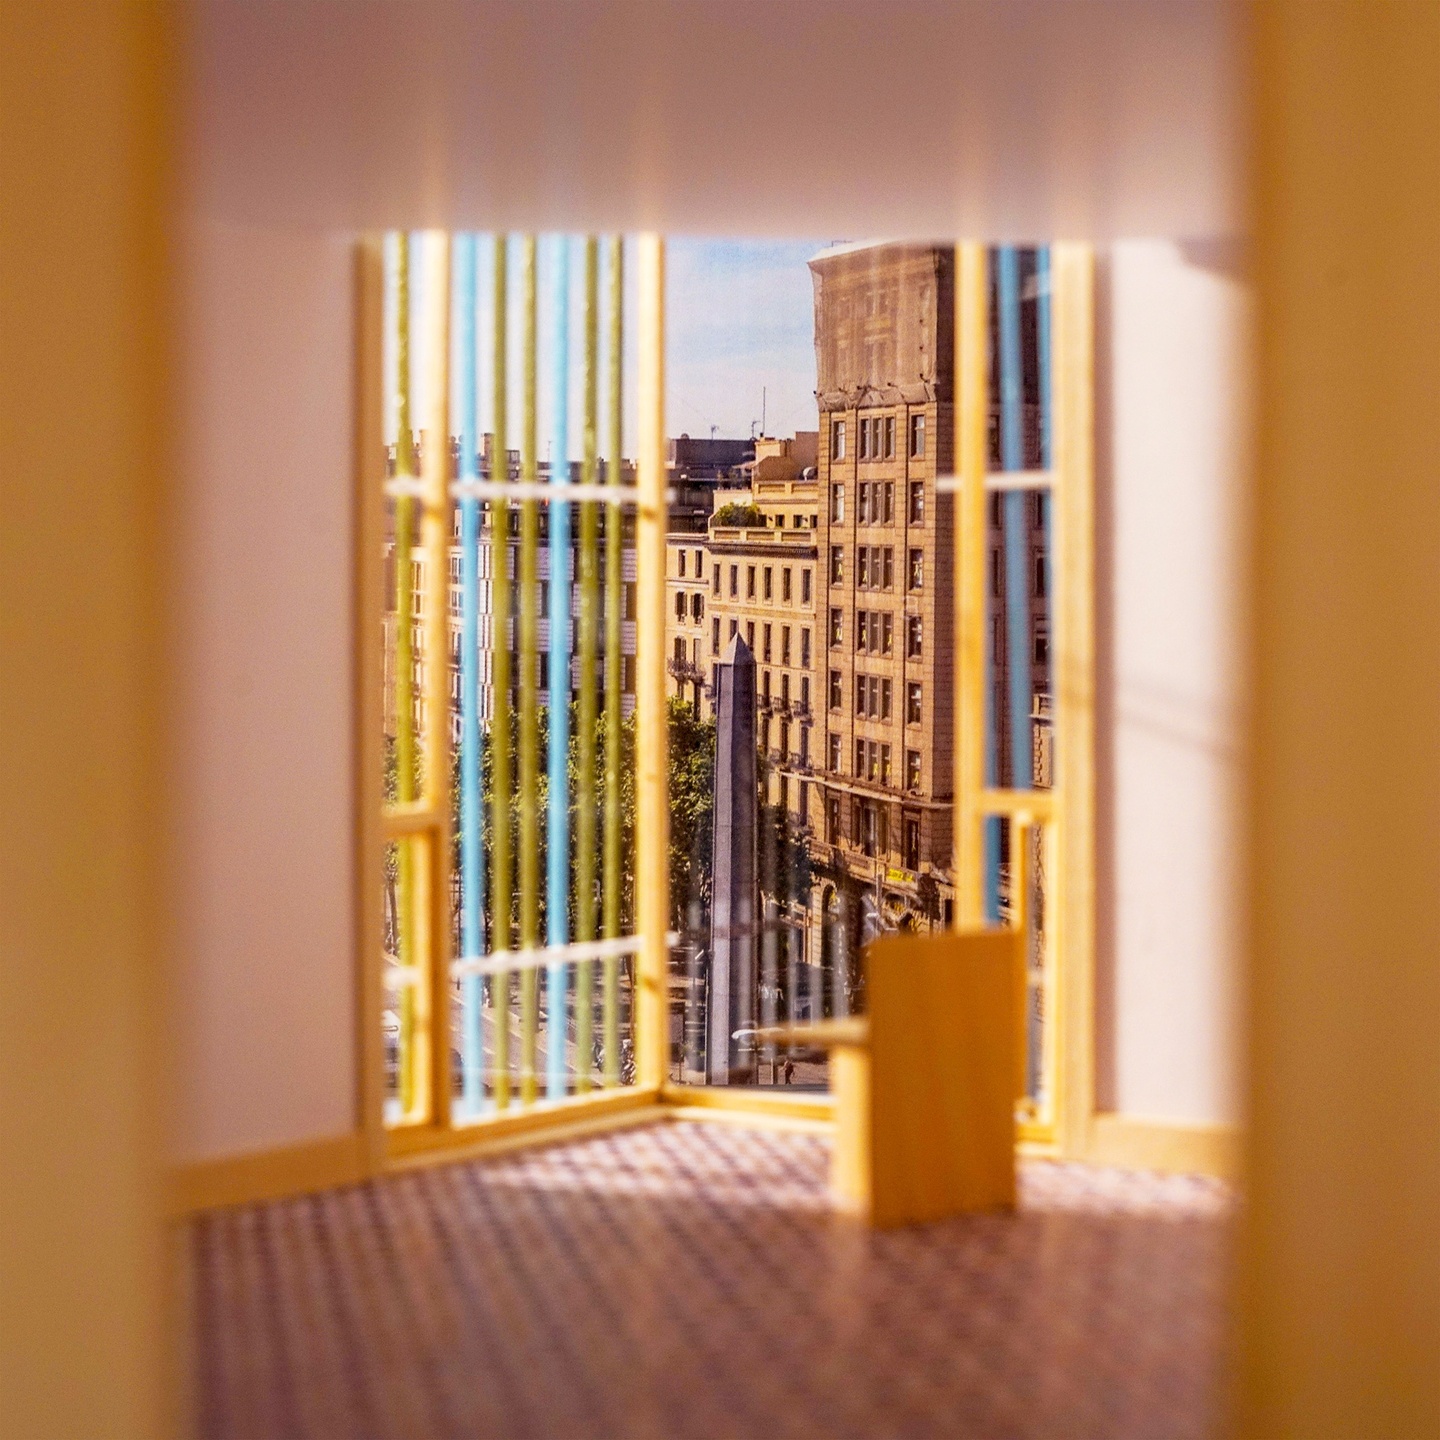 Photo collage in warm colors depicting a blurred interior building model with the vertical screening system showing a photo view of the site beyond with trees and multistory buildings.